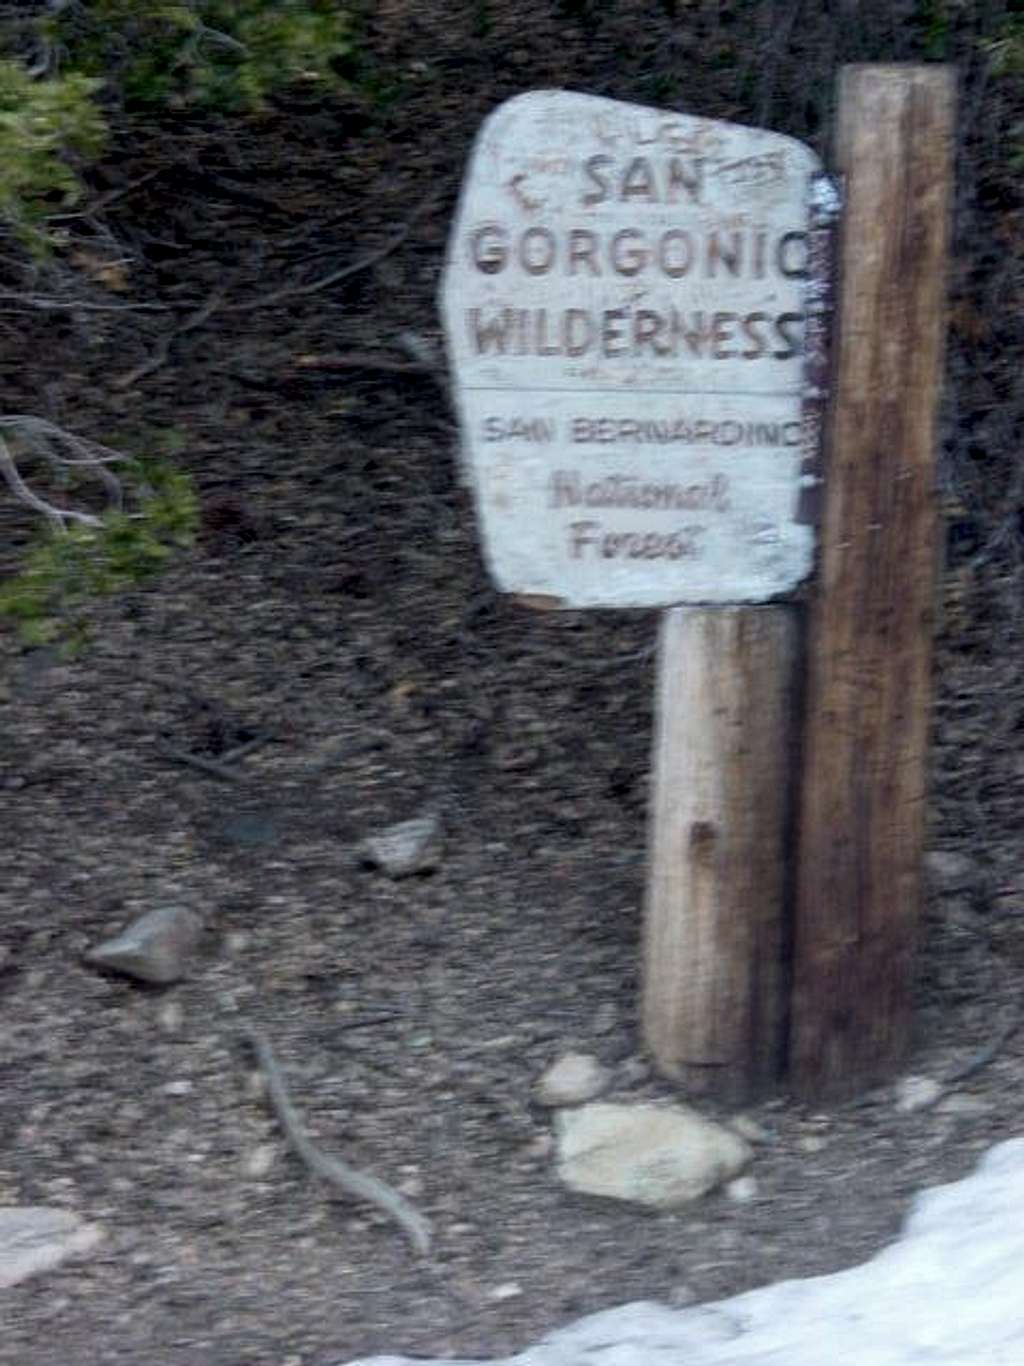 The SG Wilderness Sign